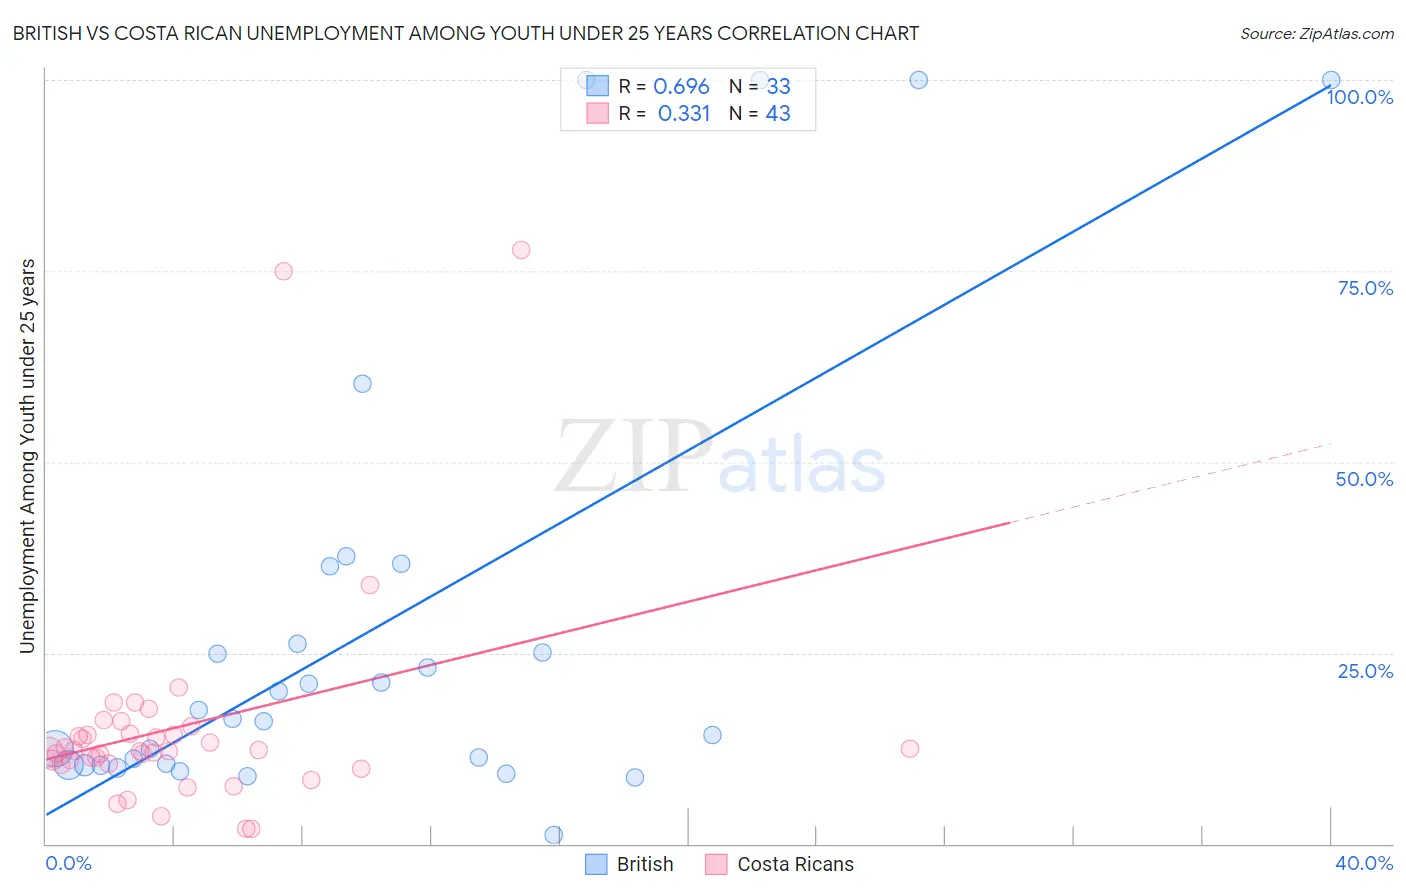 British vs Costa Rican Unemployment Among Youth under 25 years